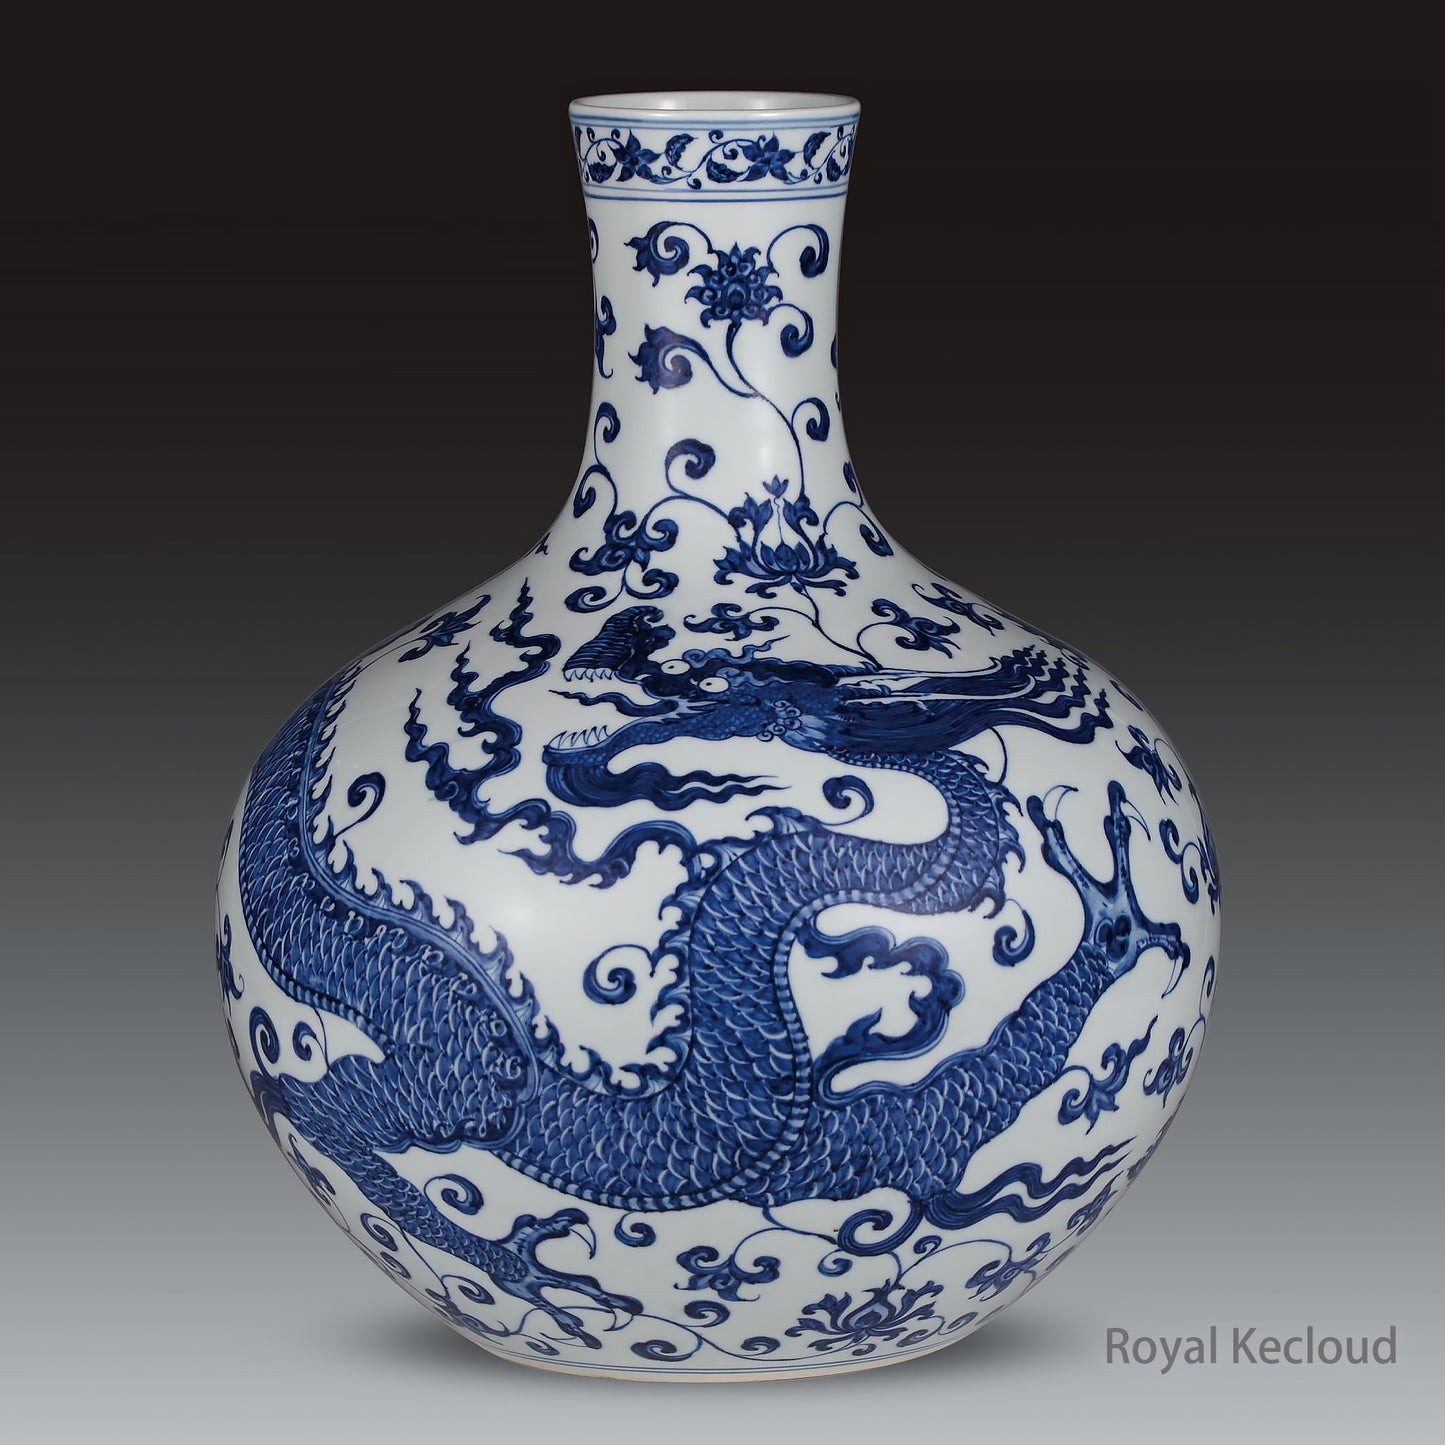 A Blue and White Globular Vase with Decoration of Dragon among Lotus Blossoms